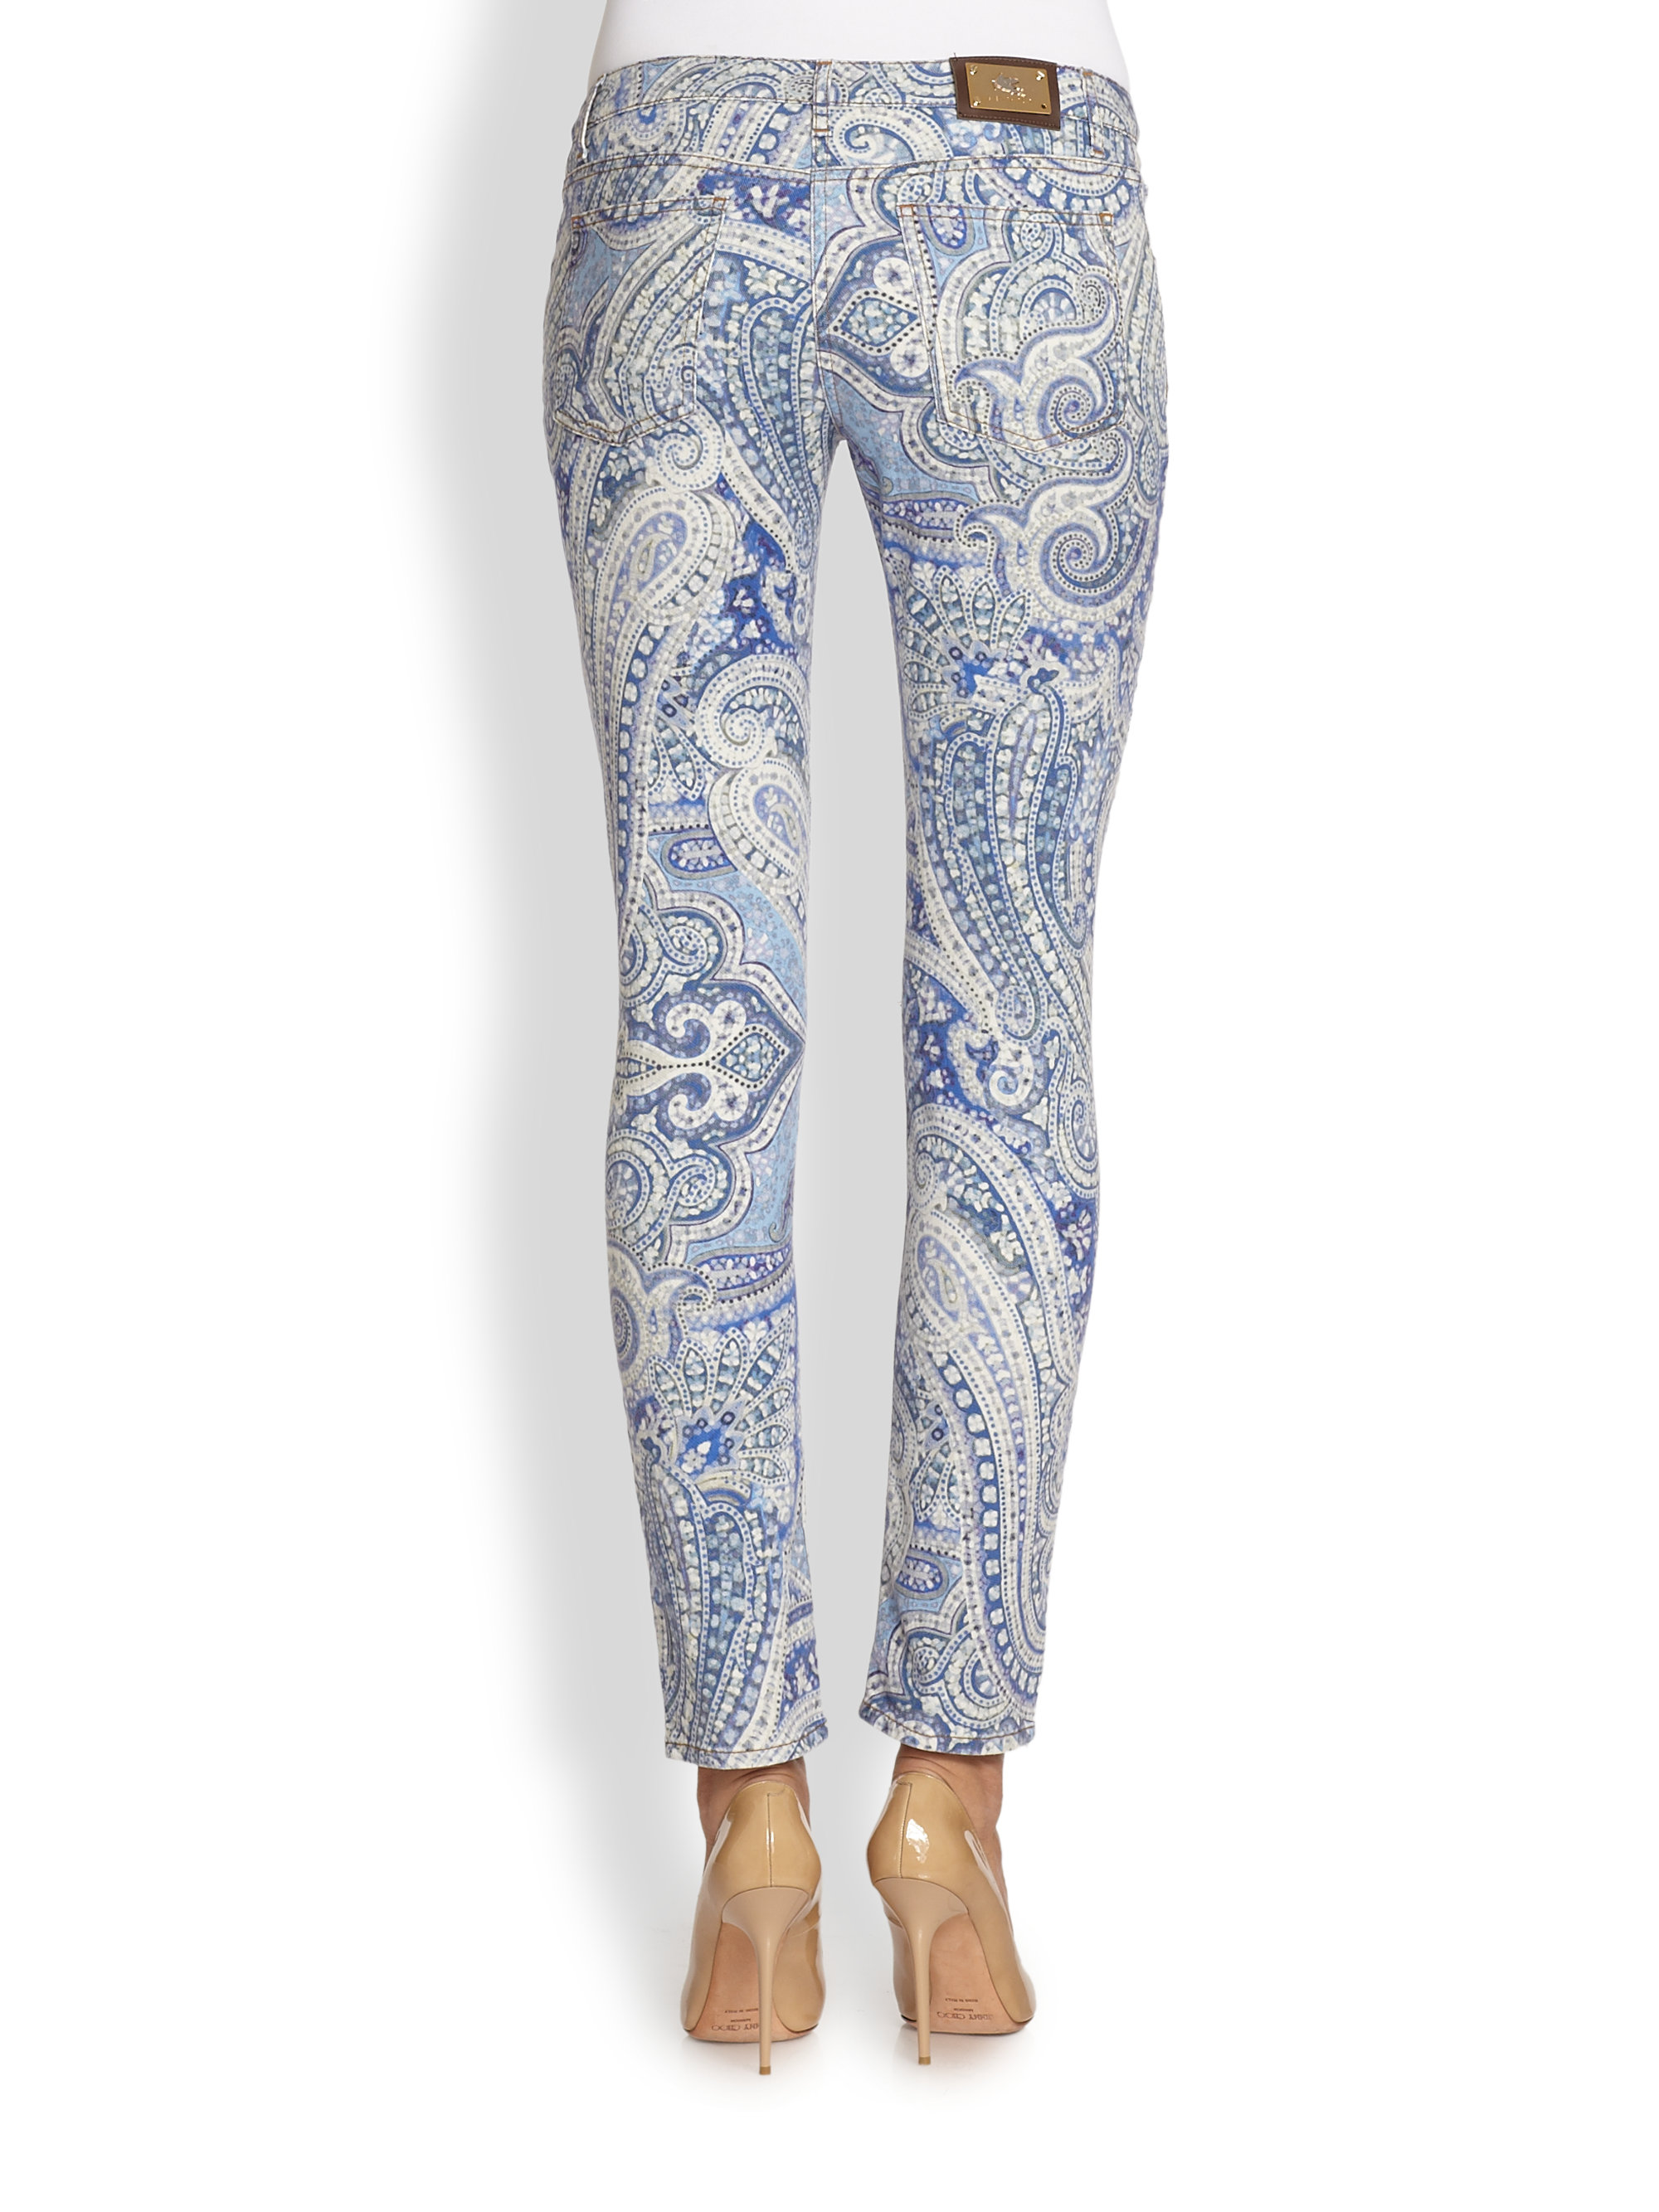 Lyst - Etro Paisley Skinny Jeans in Blue